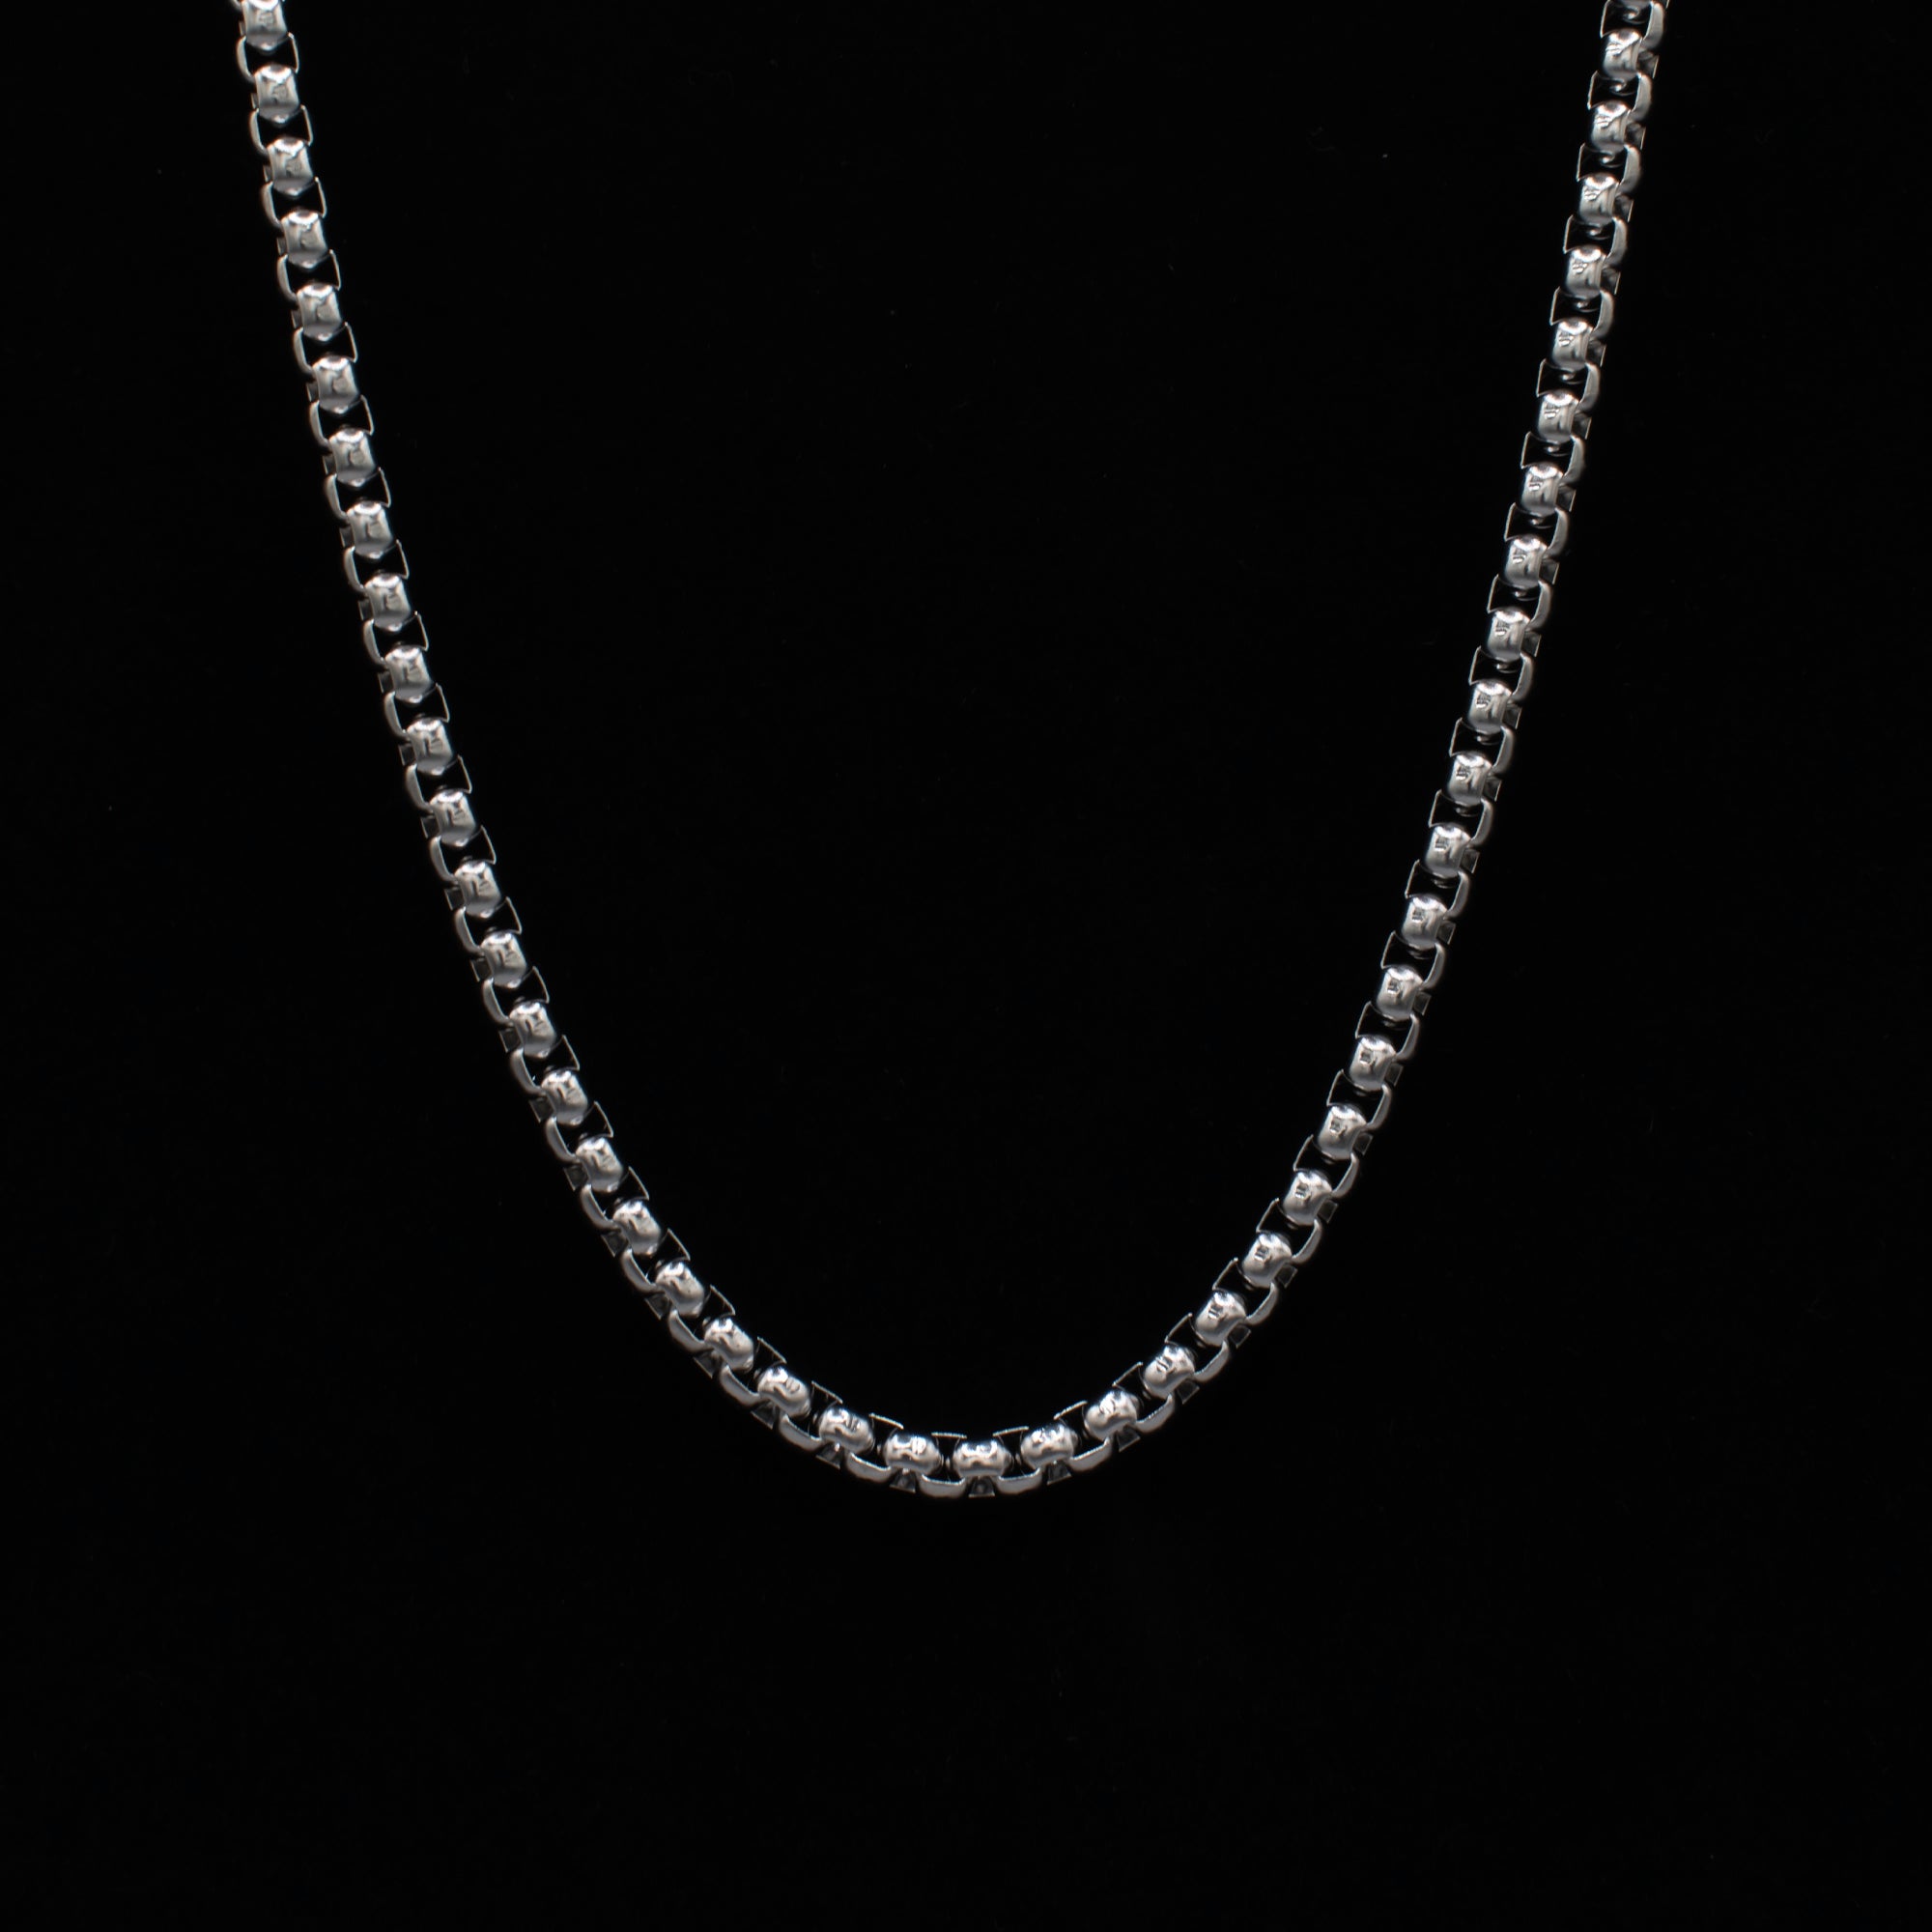 Silver Round Box Chain Necklace - 6mm